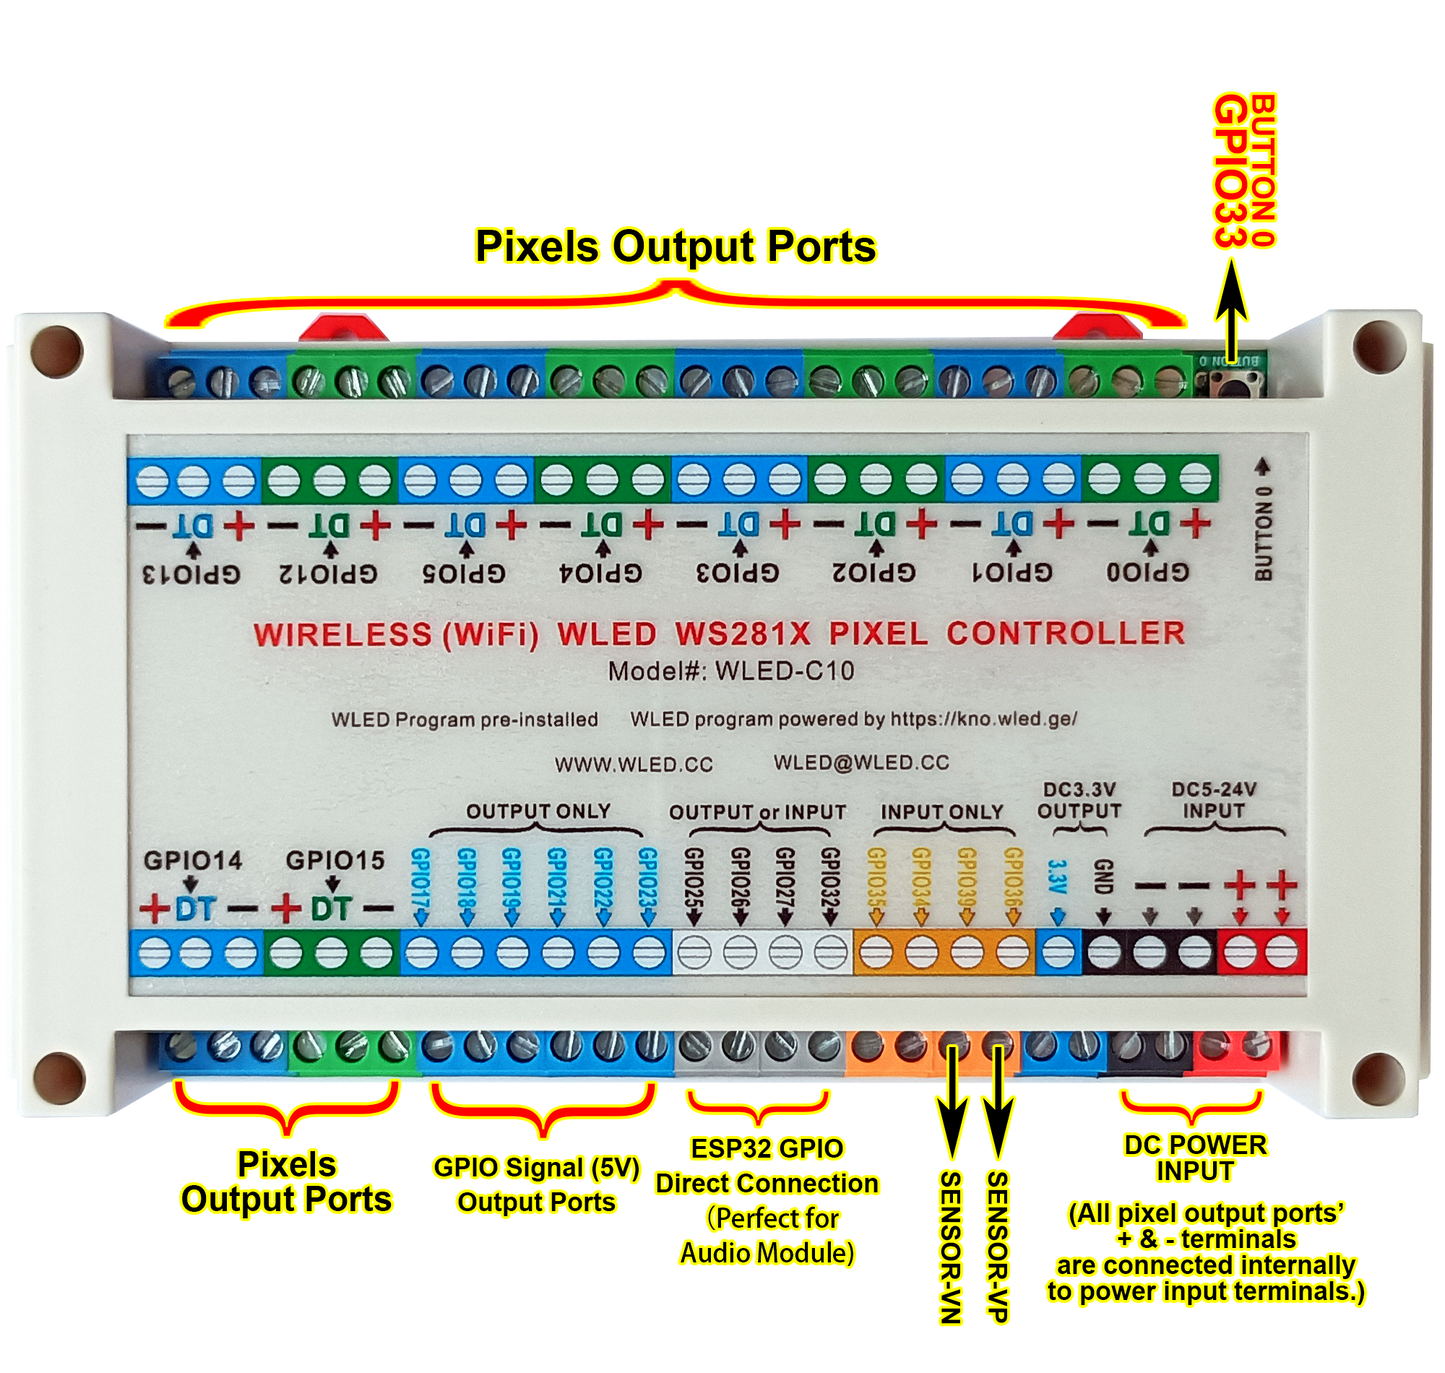 WLED pixel controller up to 10 strip ports. Screw terminals bring out all GPIO pins of ESP32